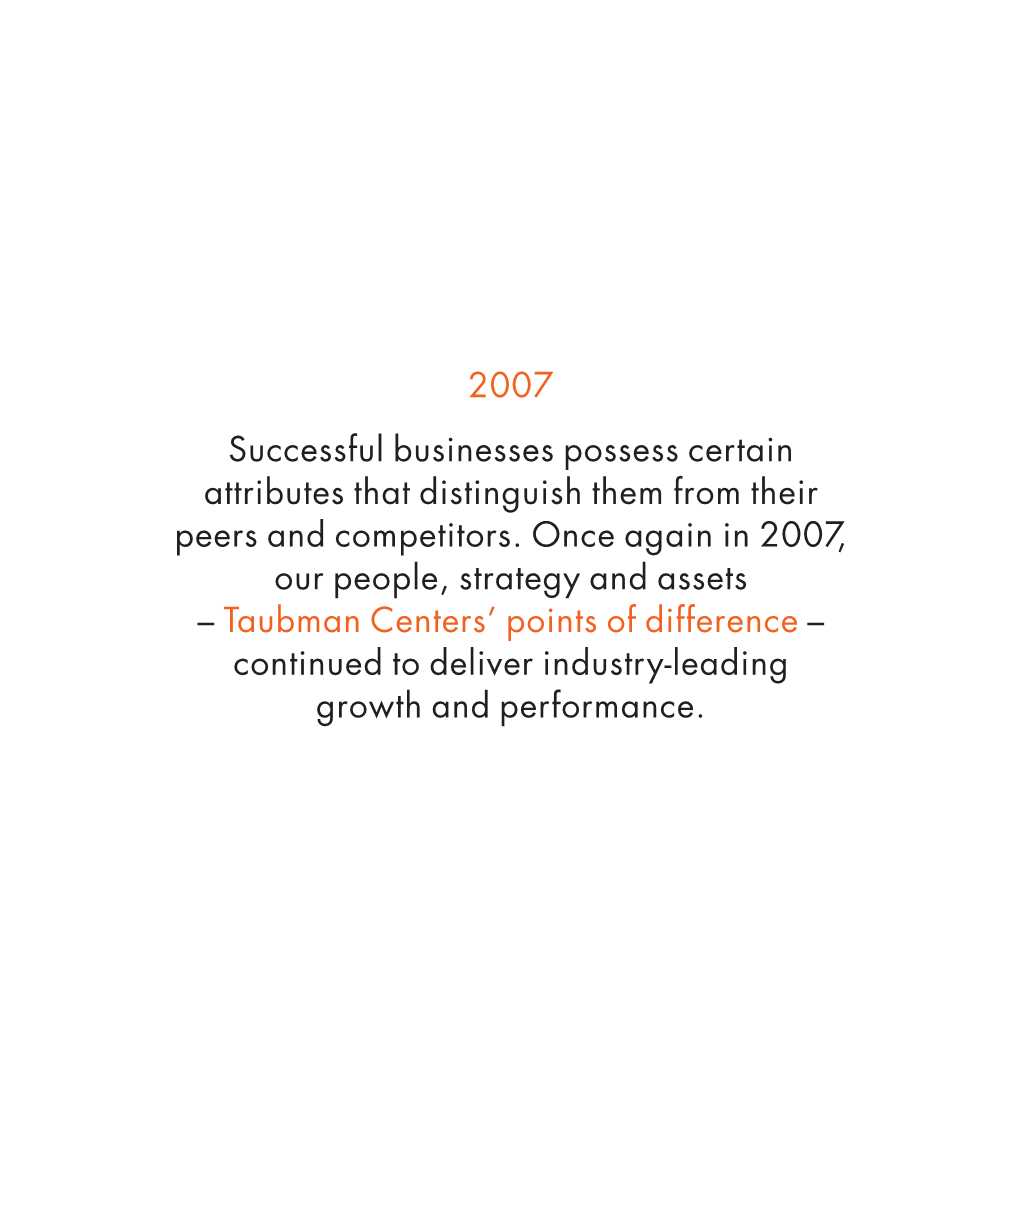 2007 Successful Businesses Possess Certain Attributes That Distinguish Them from Their Peers and Competitors